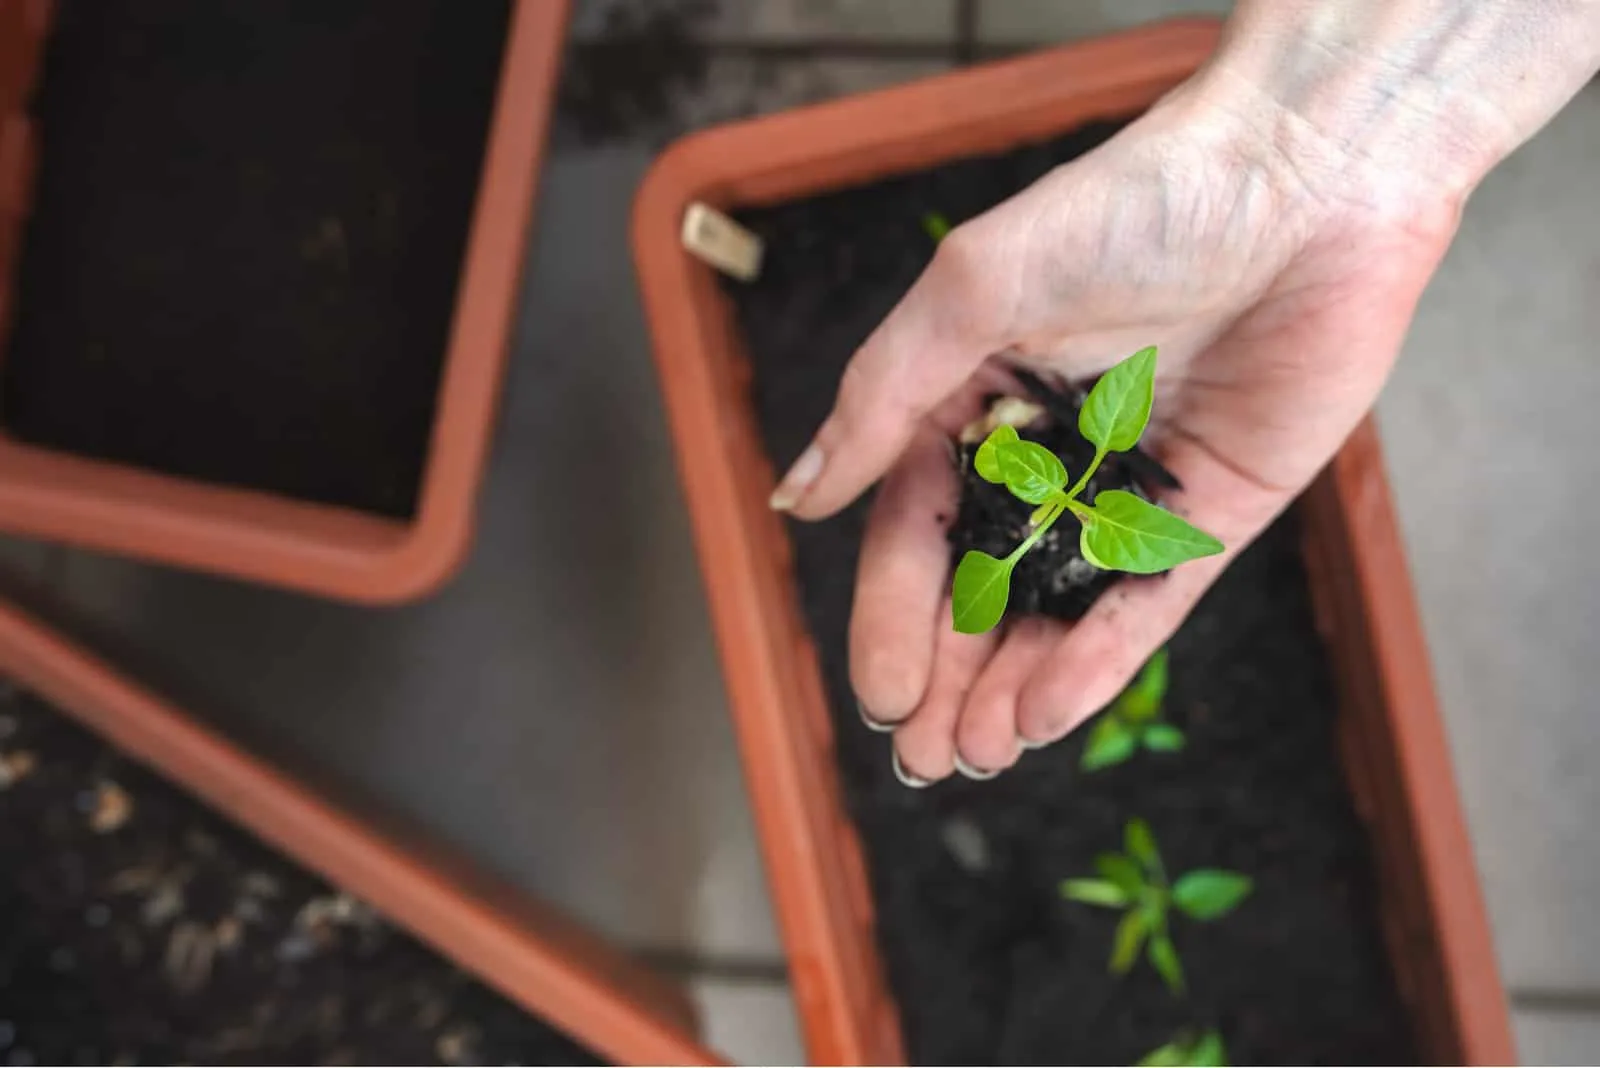 habanero pepper seedling in a woman's hand before planting